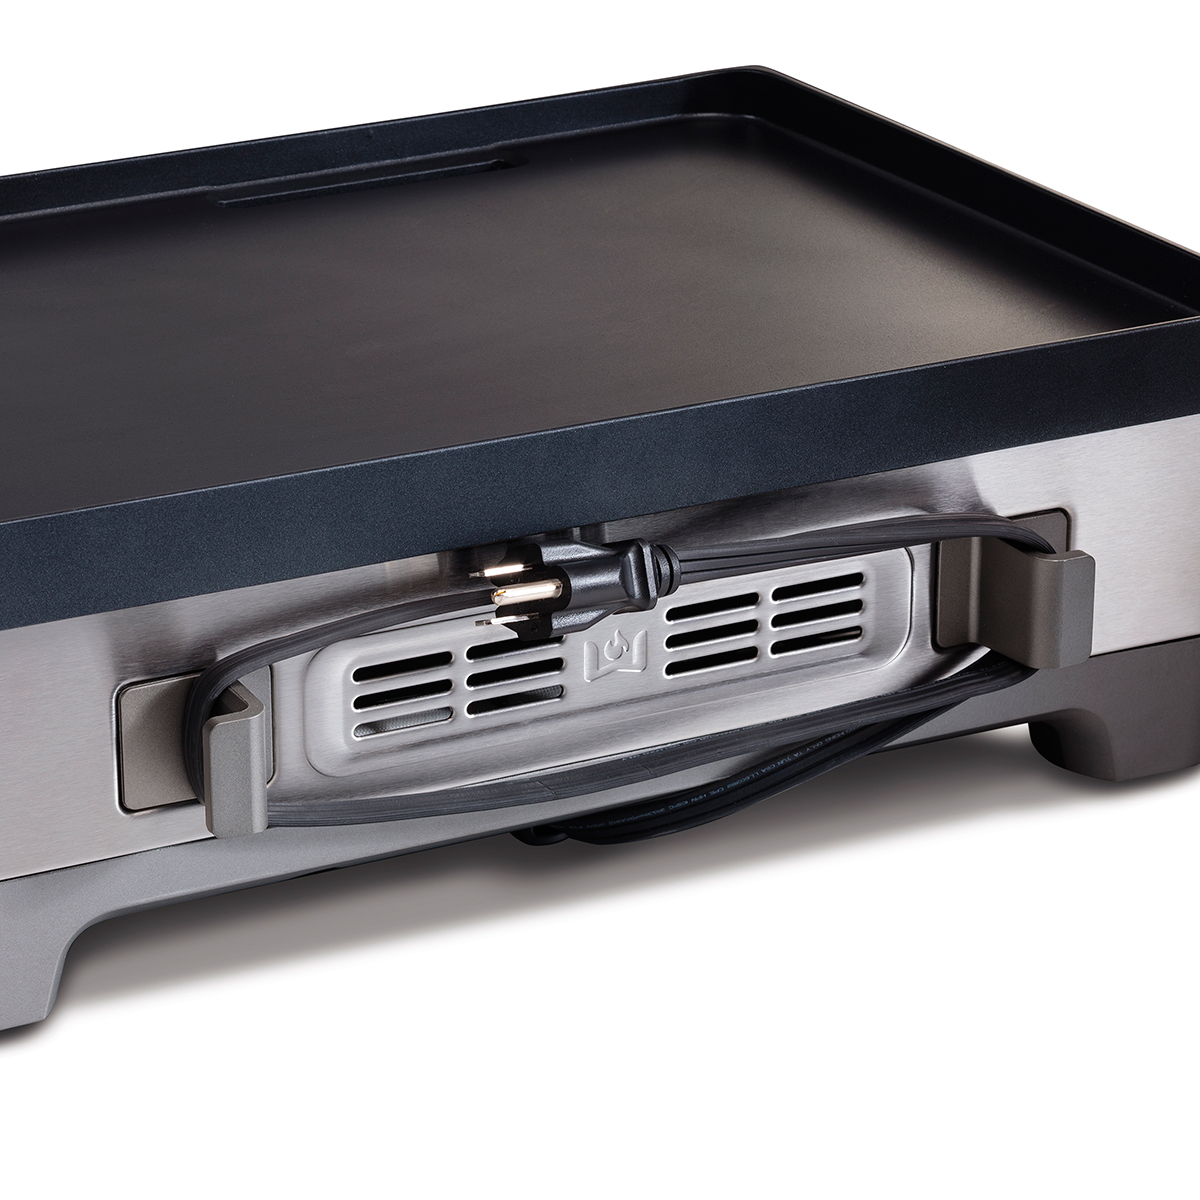 Wolf Gourmet Precision Griddle + Reviews